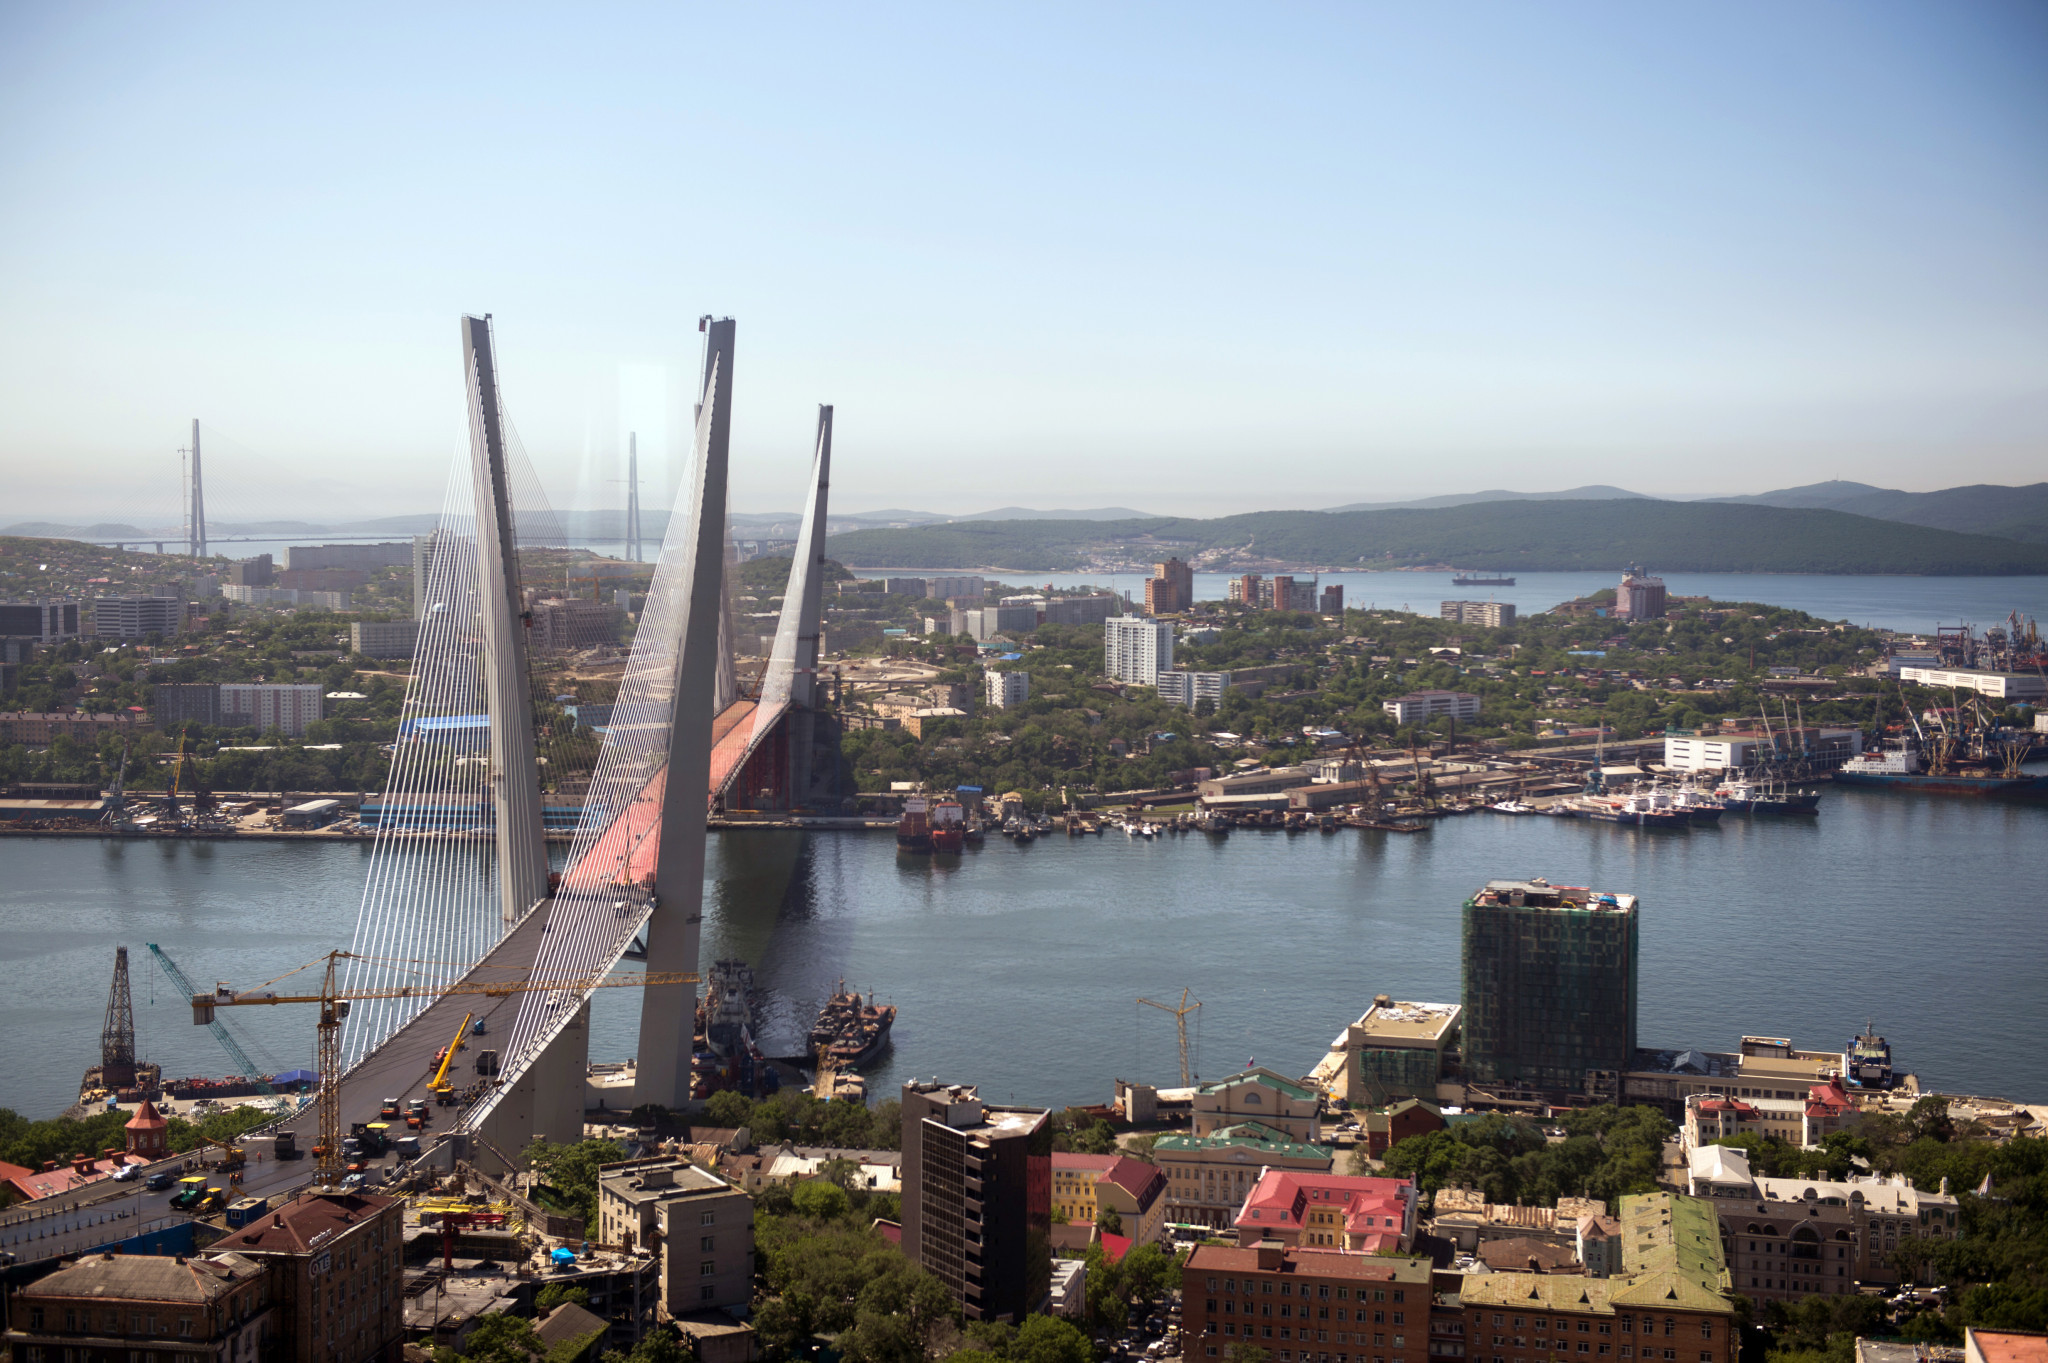 Vladivostok is a port city in Russia's Primorsky Krai region, close to the borders of China and North Korea ©Getty Images